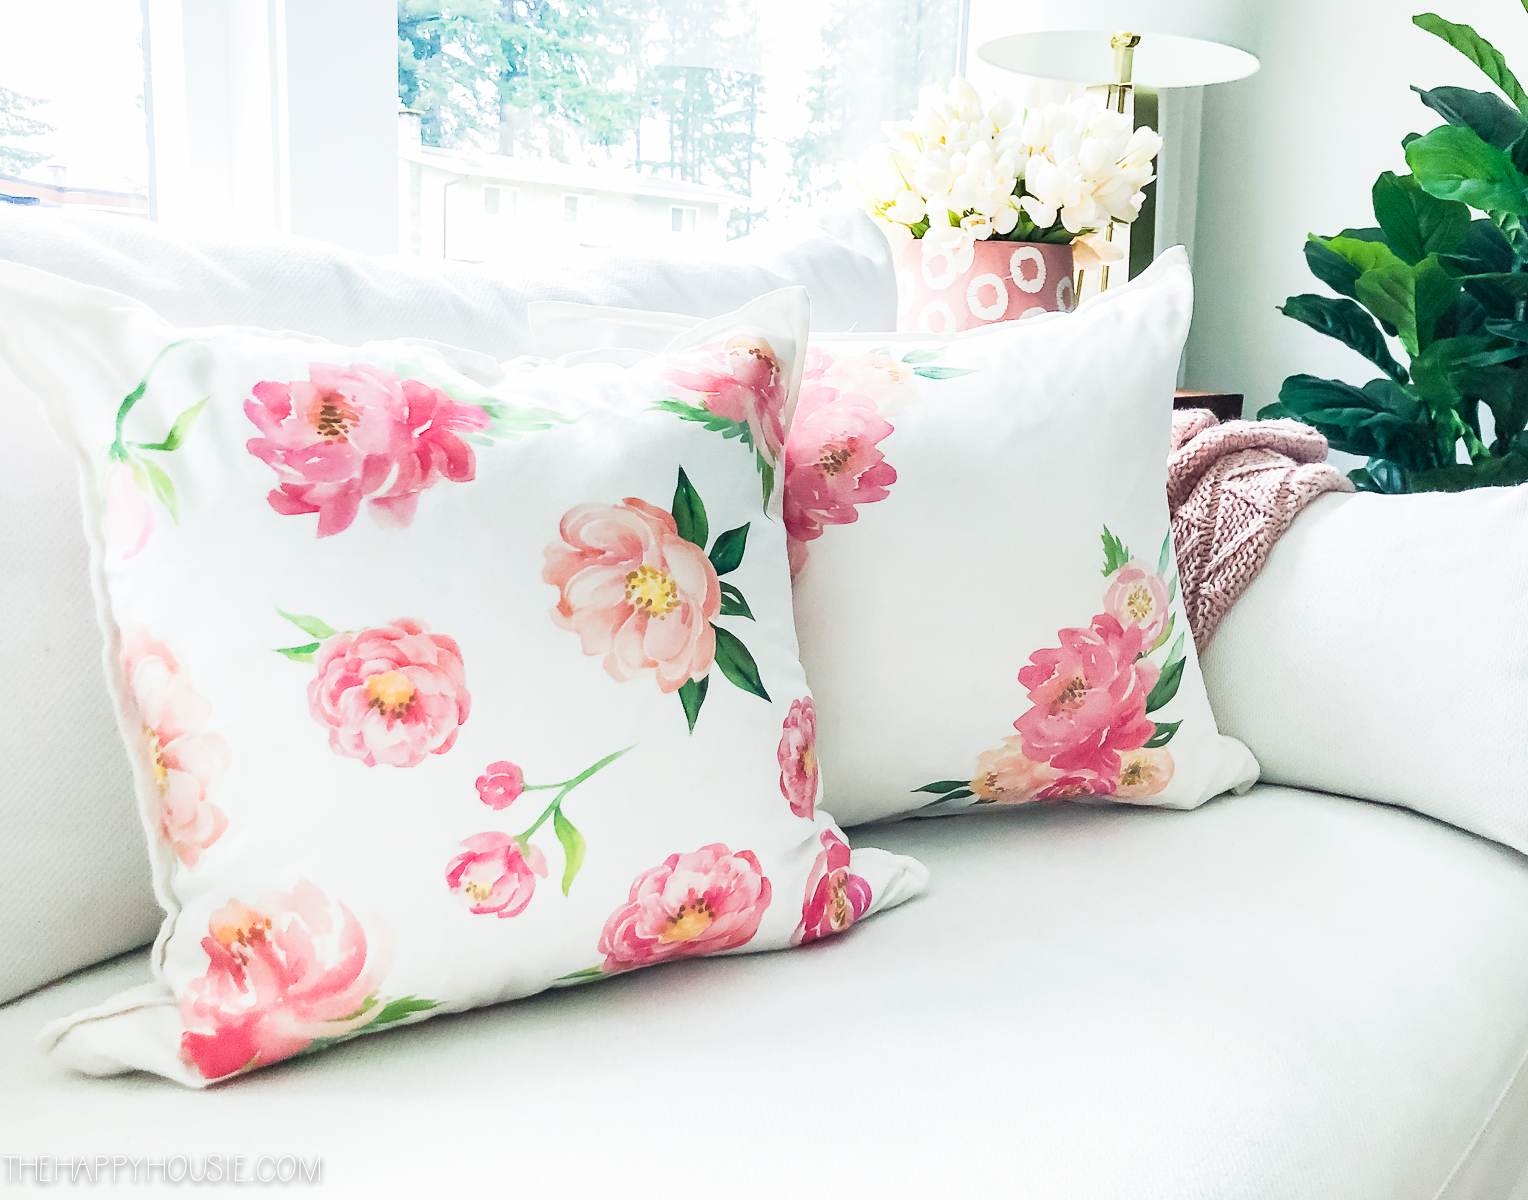 Two floral pillows on a white couch.